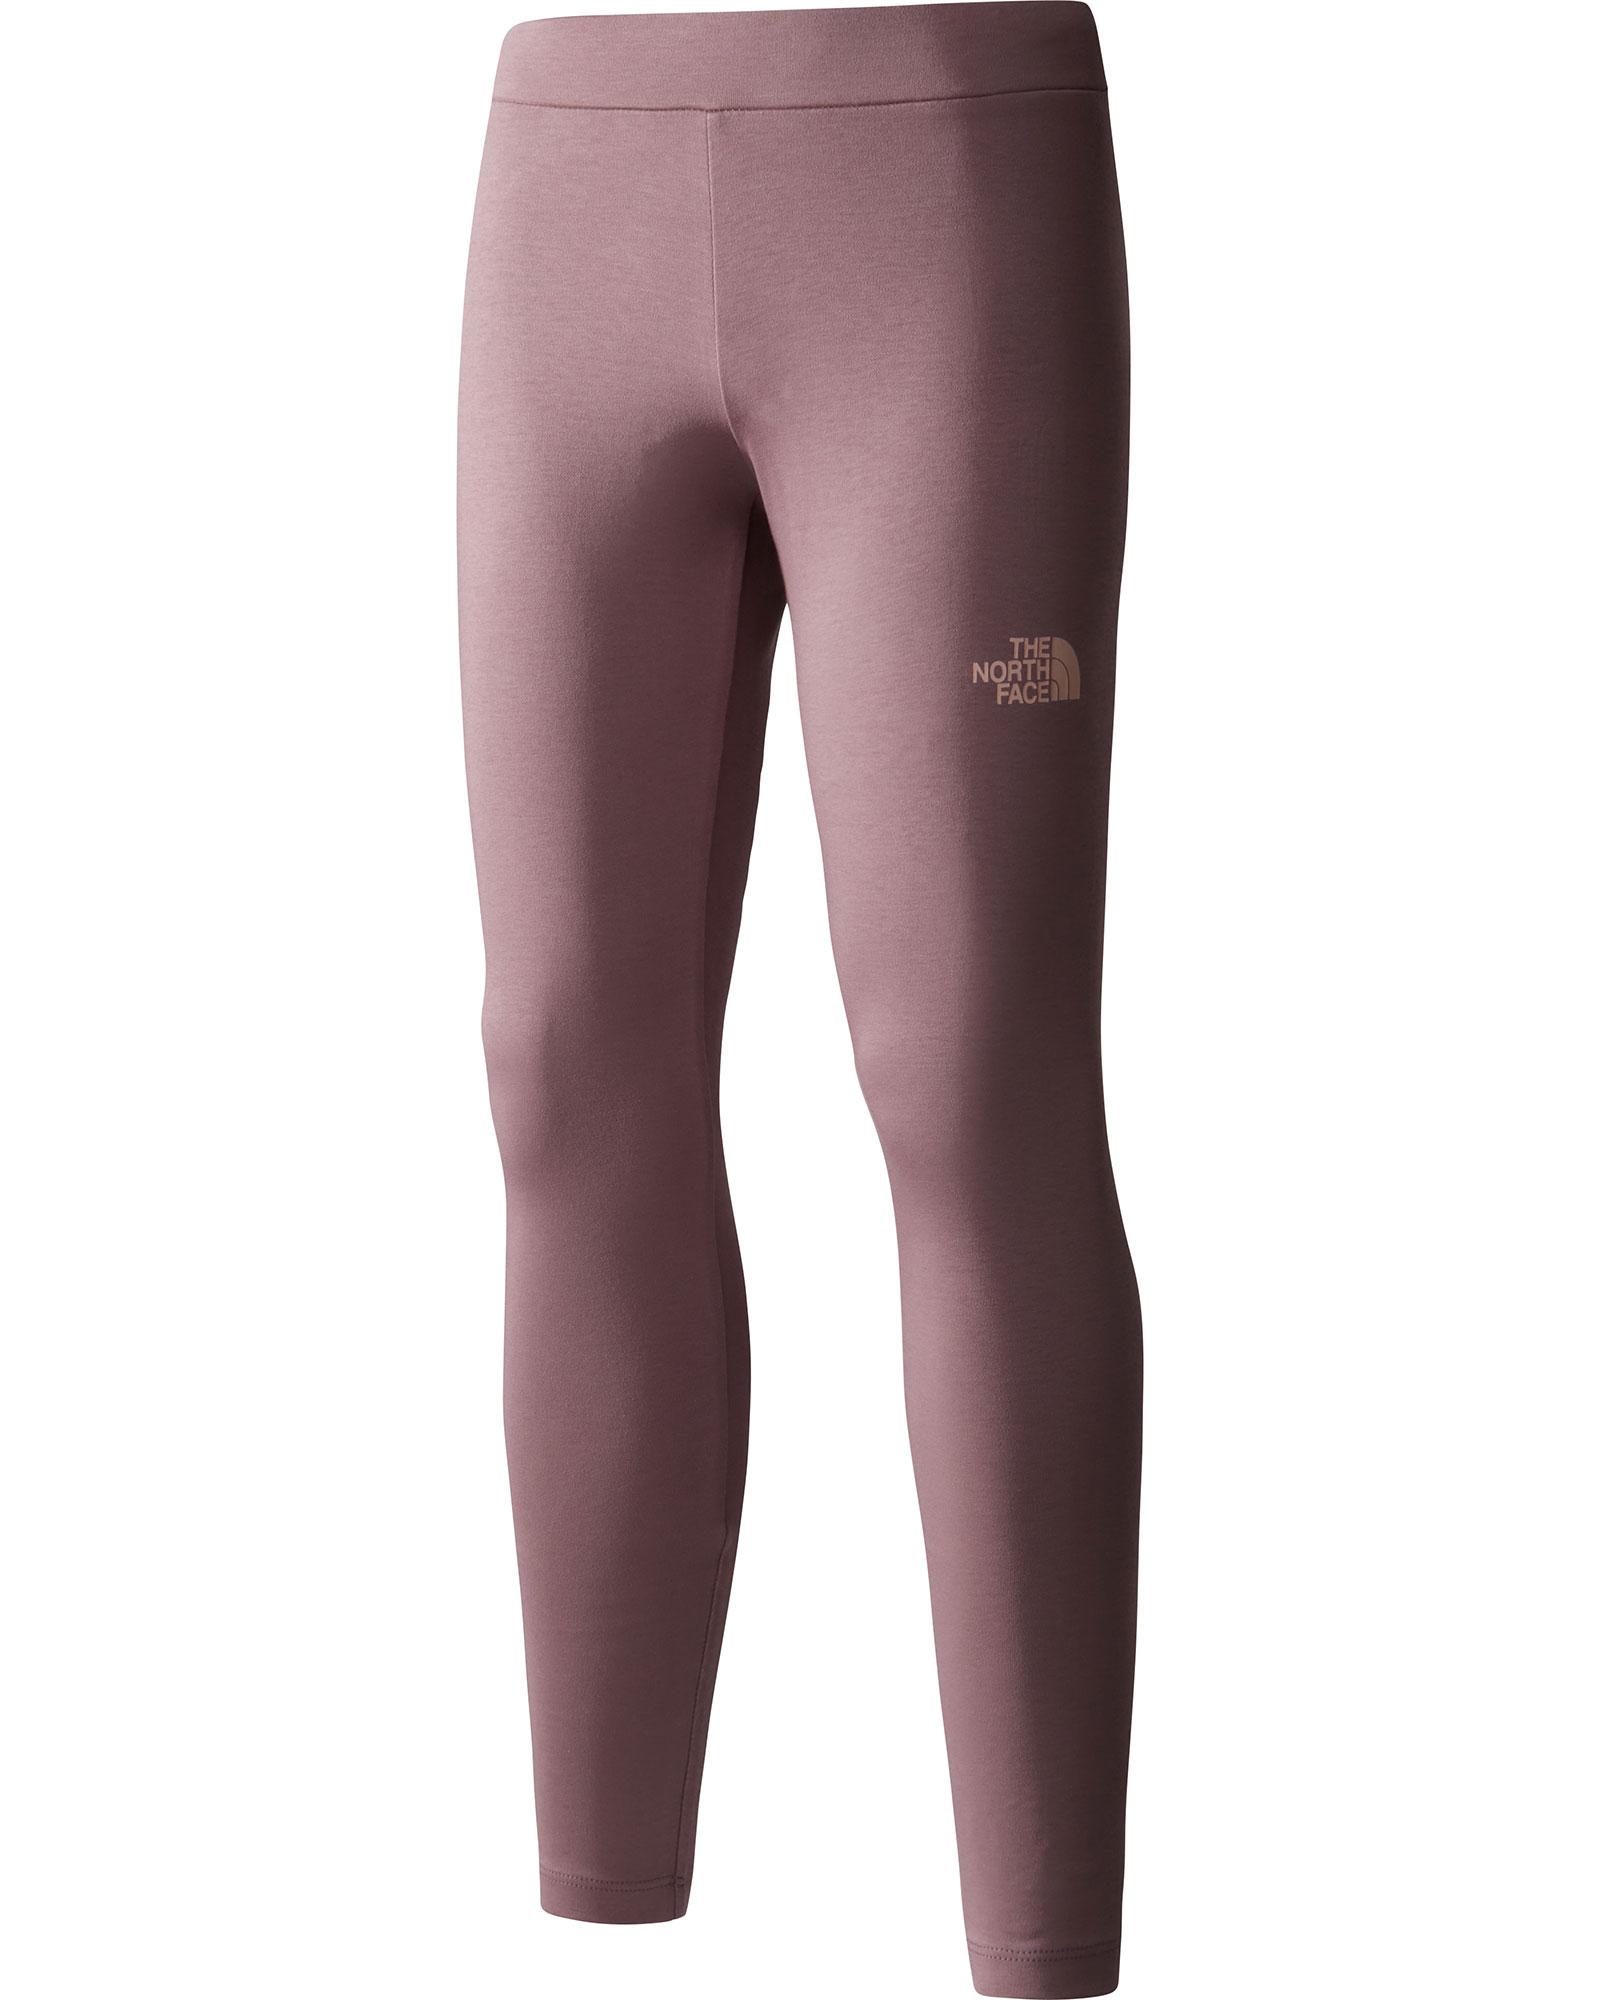 The North Face Girl’s Graphic Leggings - Fawn Grey S